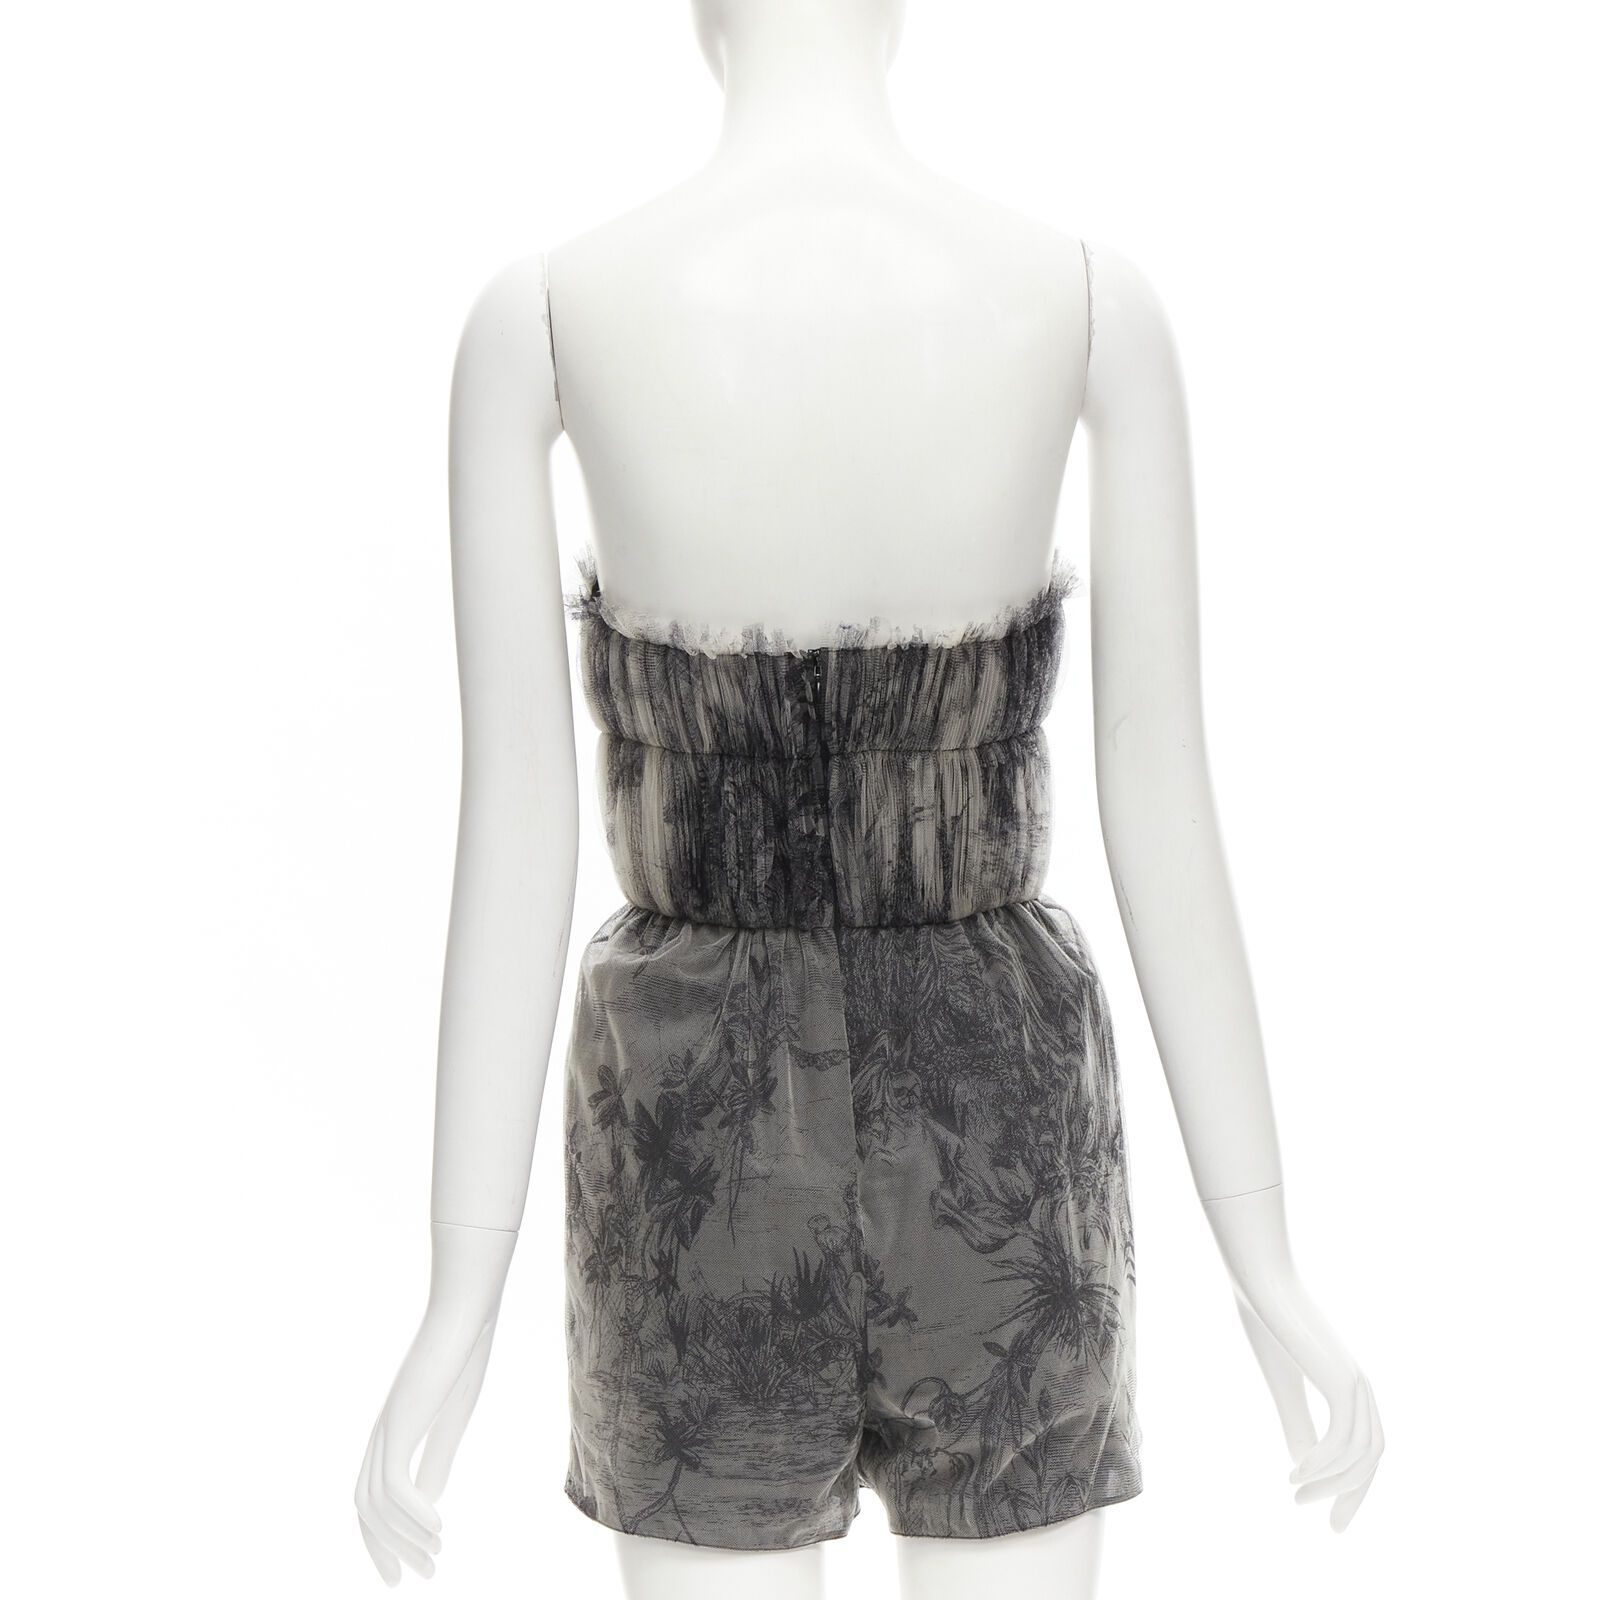 Dior new CHRISTIAN DIOR Fantaisie Dioriviera tulle gathered pleated romper FR34 XS Size 26" / US 2 / IT 38 - 5 Thumbnail